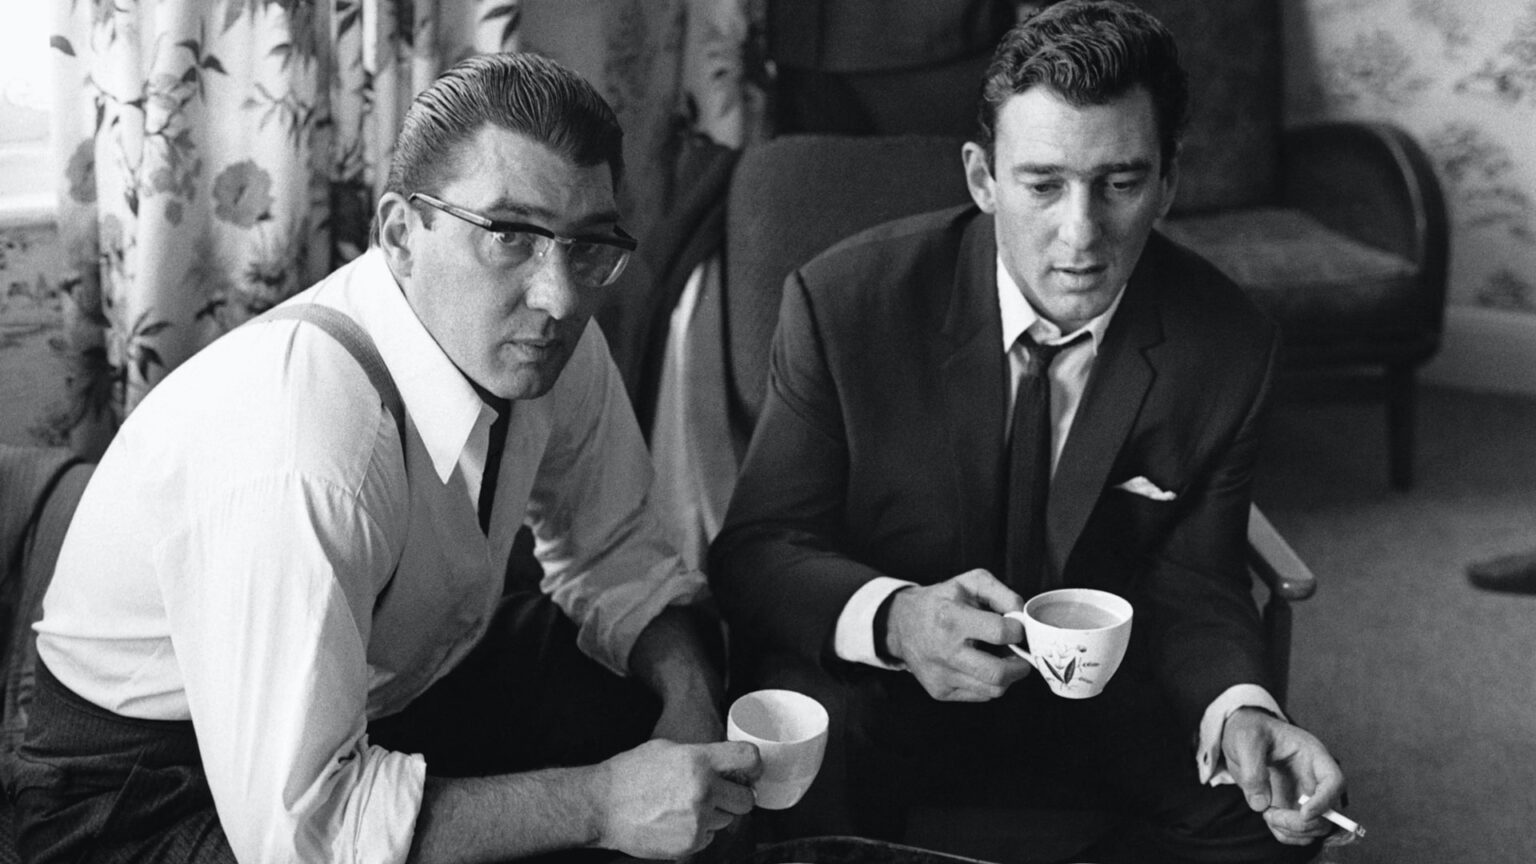 The Kray twins were a pair of British gangsters who ran “the Firm”. Meet the gangsters who cause chaos in Britain during the 1960s.